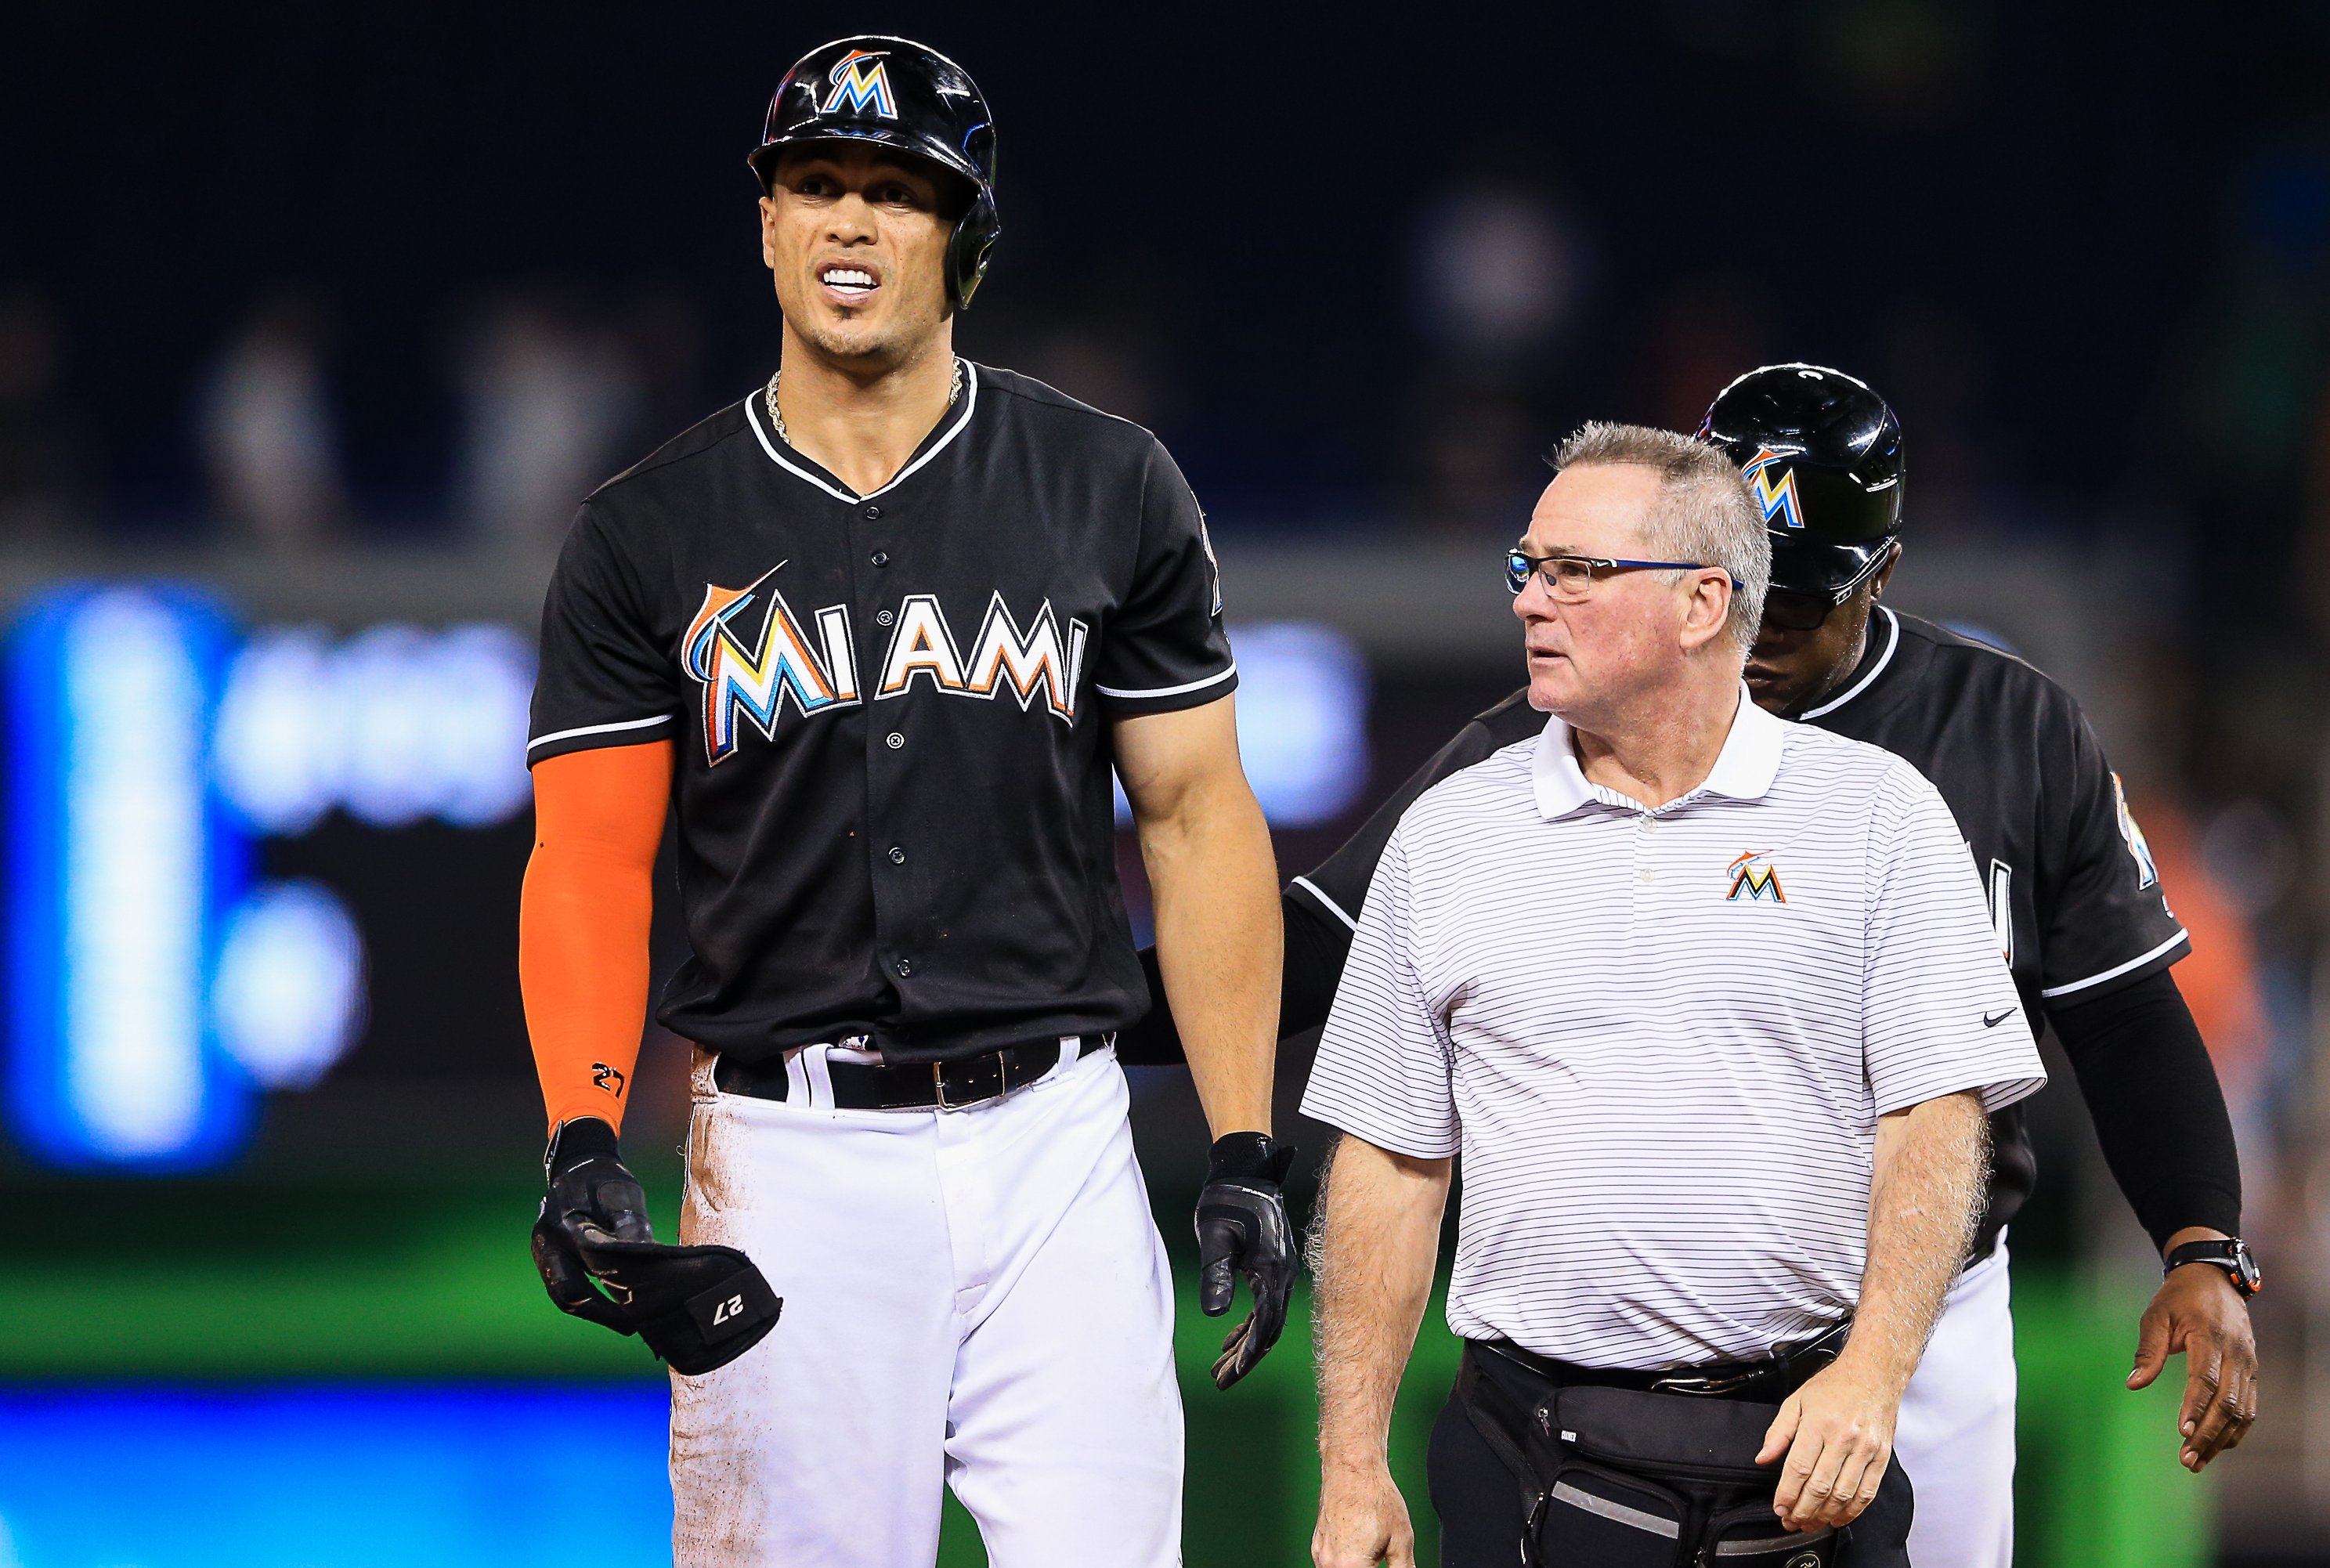 Why Giancarlo Stanton to the Yankees is the A-Rod trade all over again